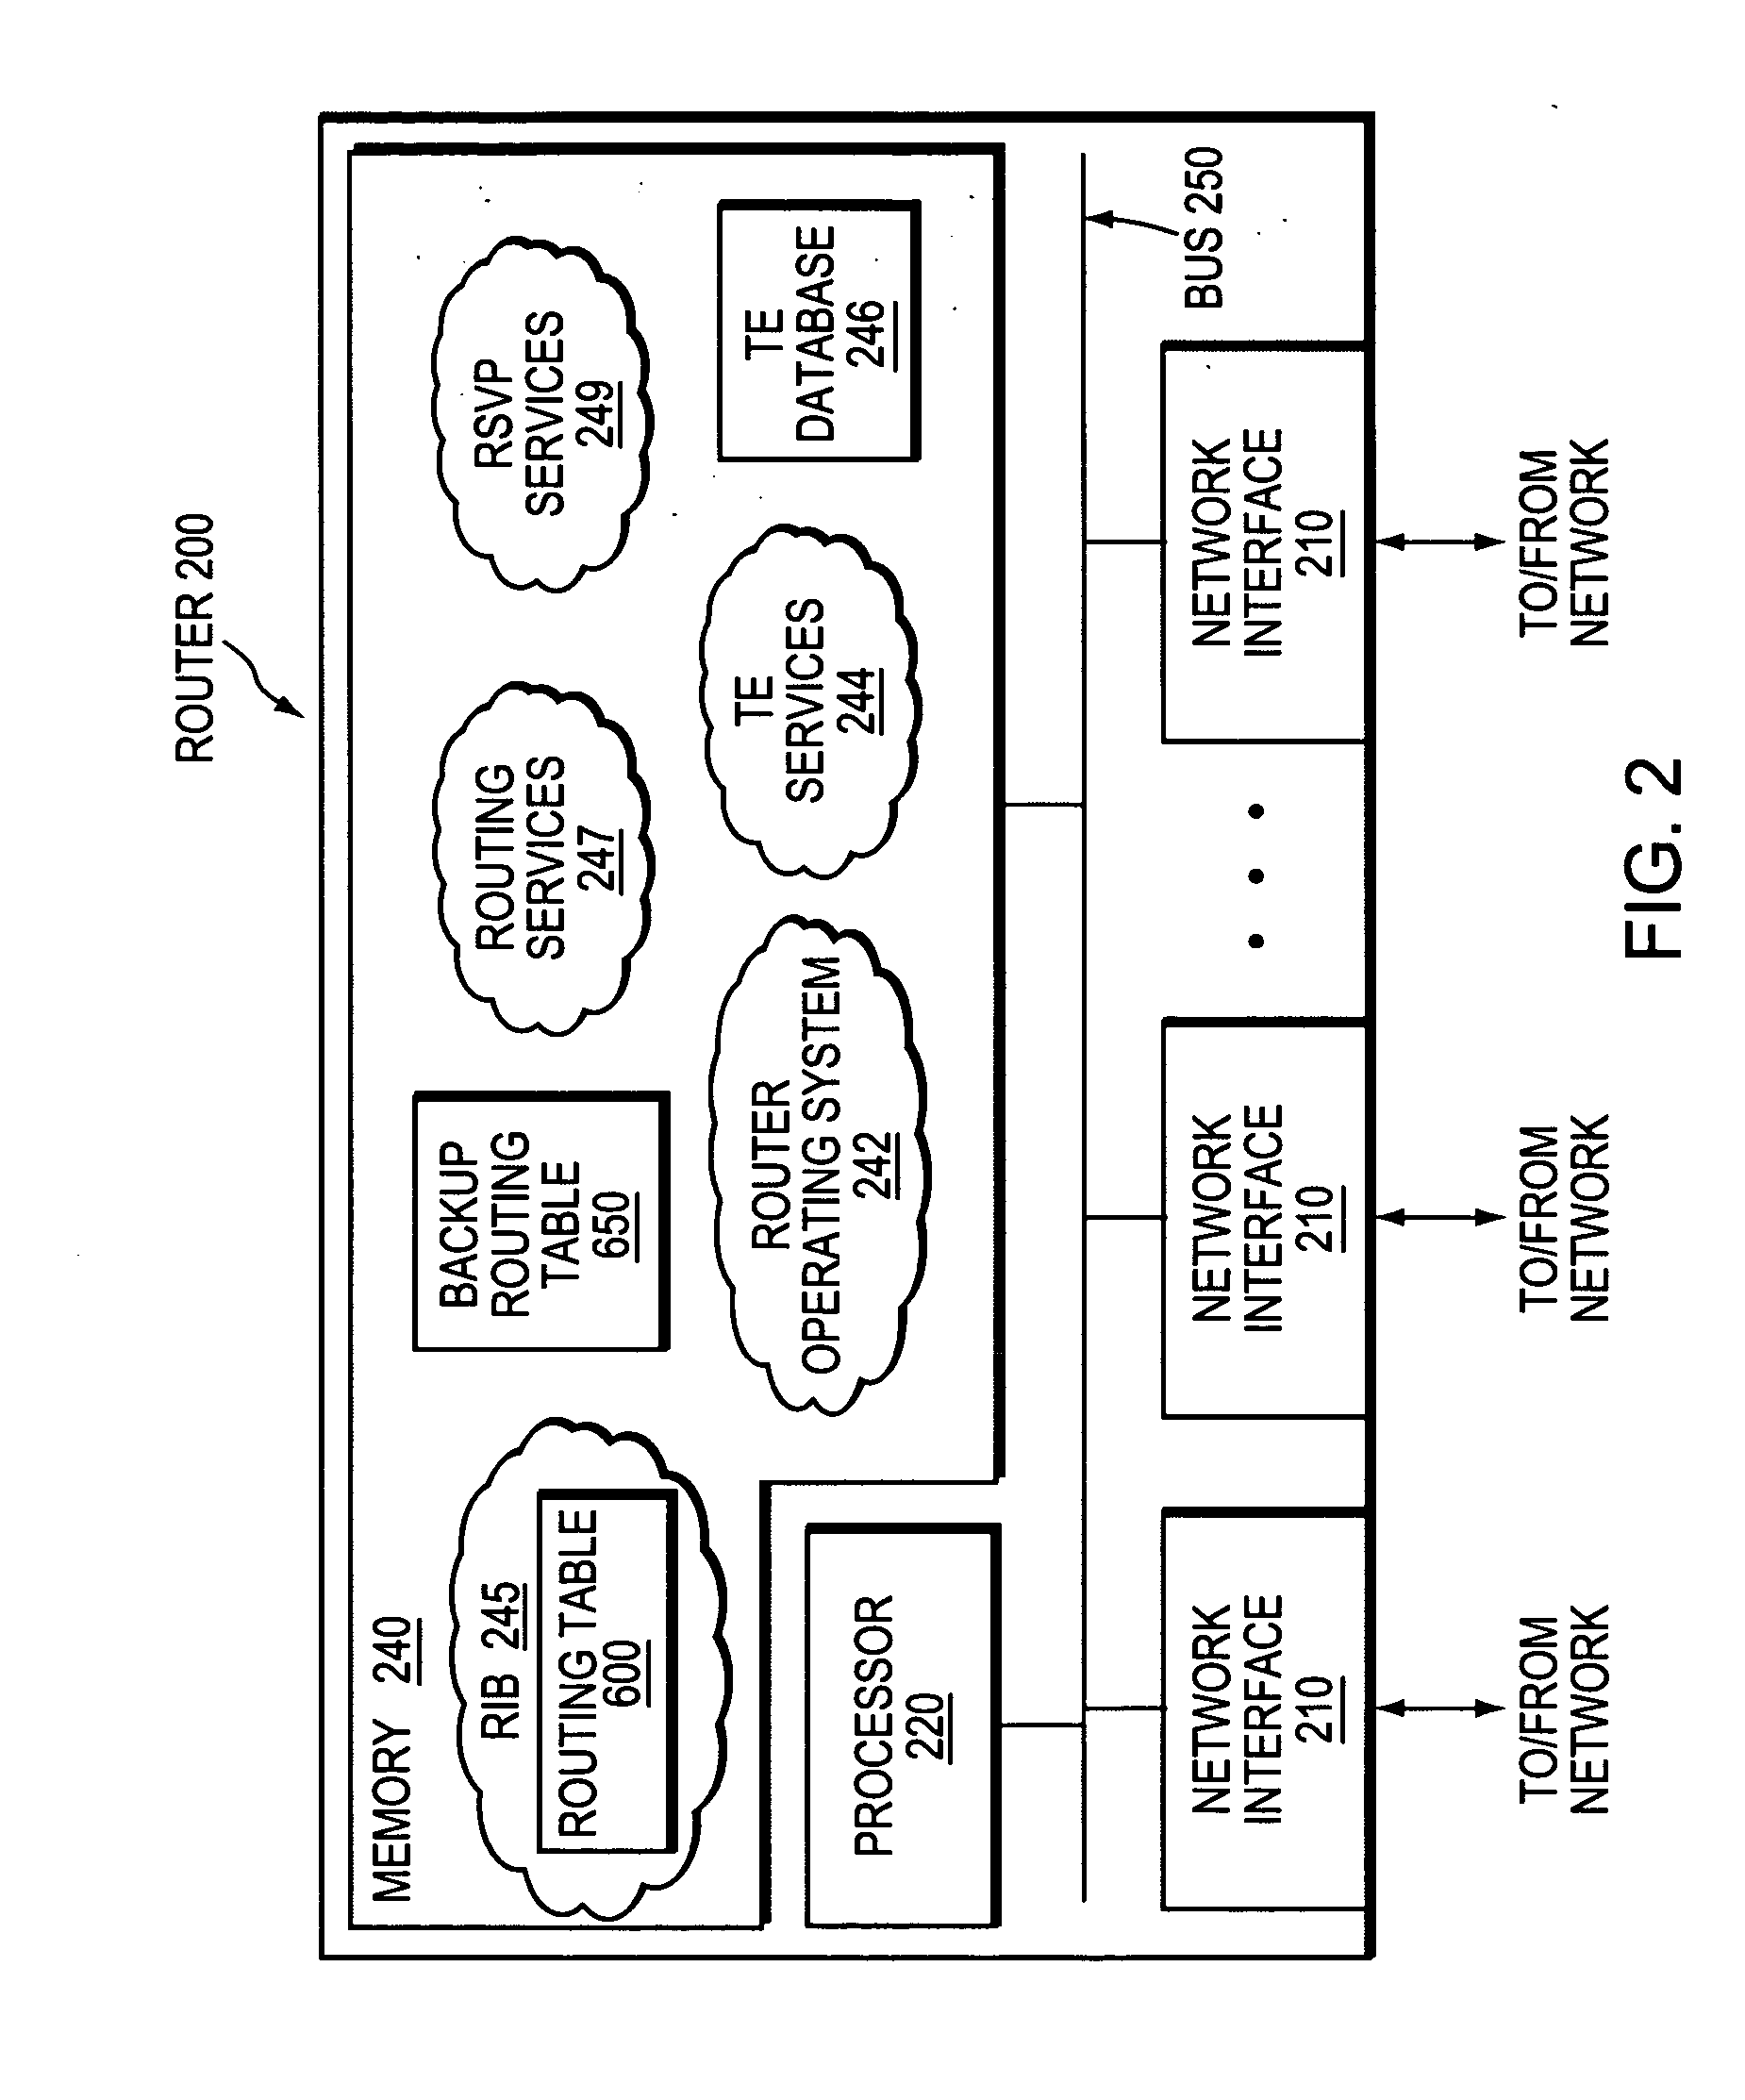 System and method for protecting against failure of a TE-LSP tail-end node